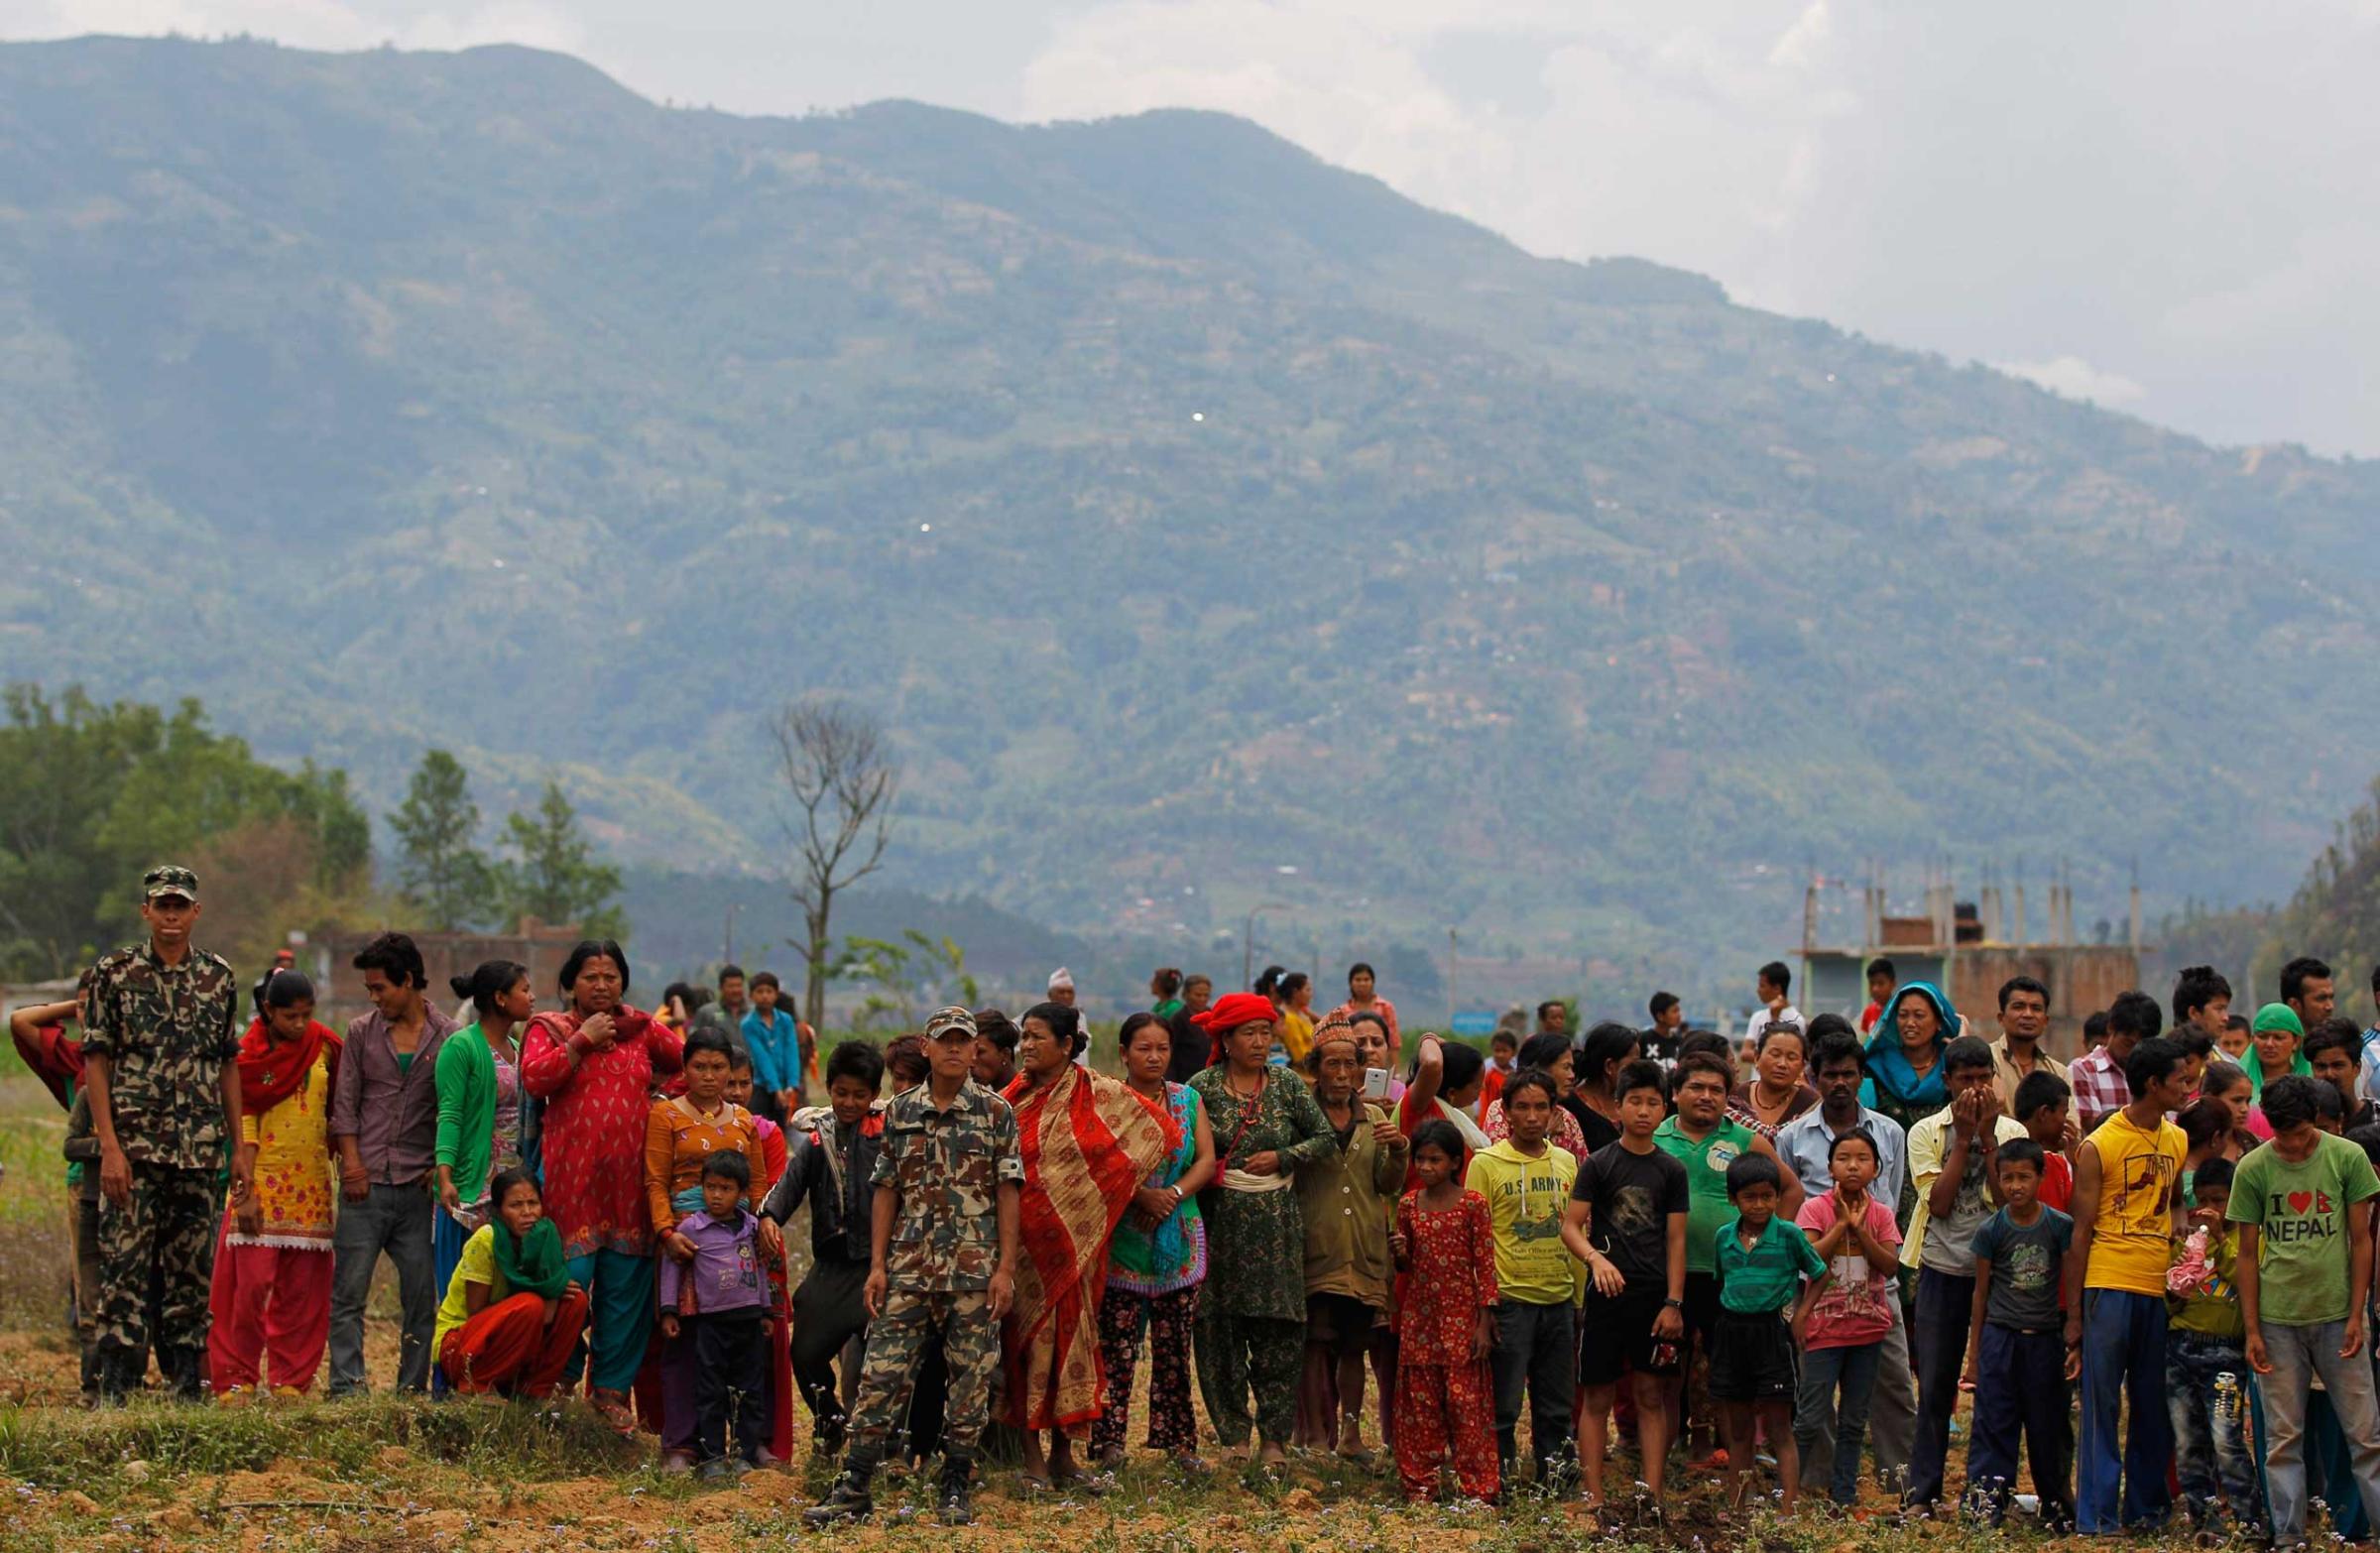 Nepalese villagers watch as relief material is brought in an Indian air force helicopter for victims of Saturdayís earthquake at Trishuli Bazar in Nepal on April 27, 2015.